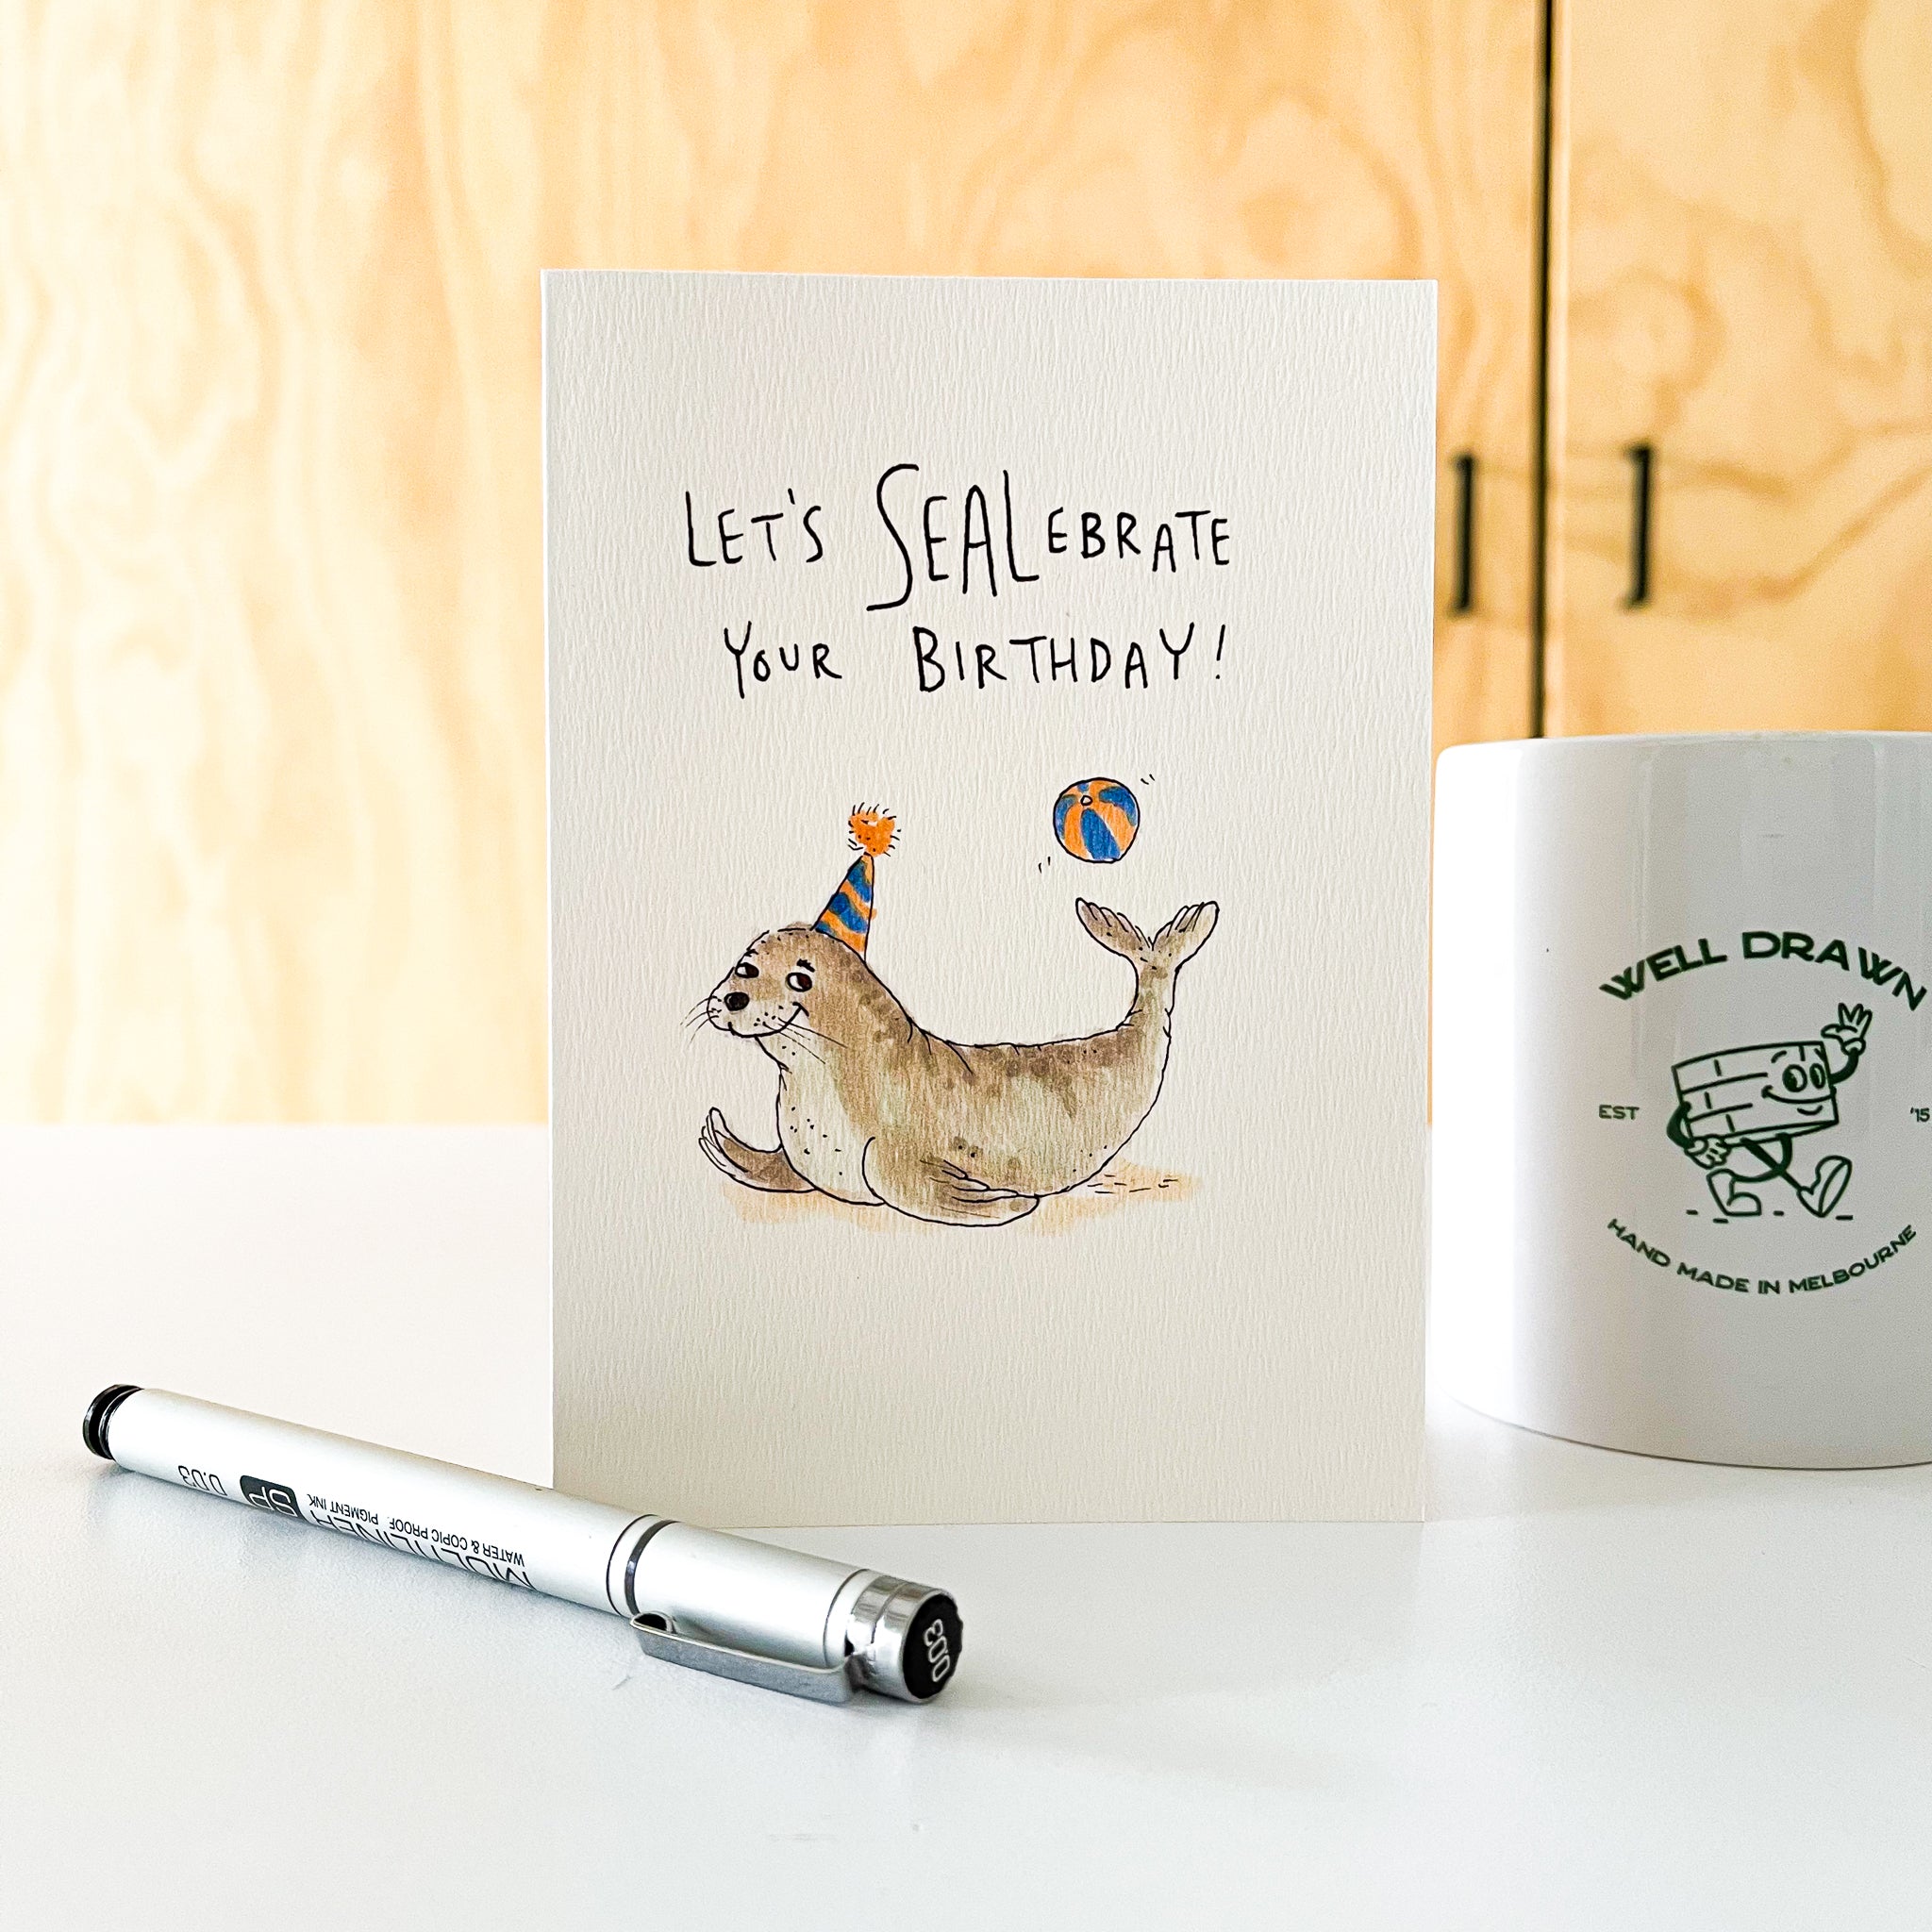 Let's Sealebrate Your Birthday - Well Drawn